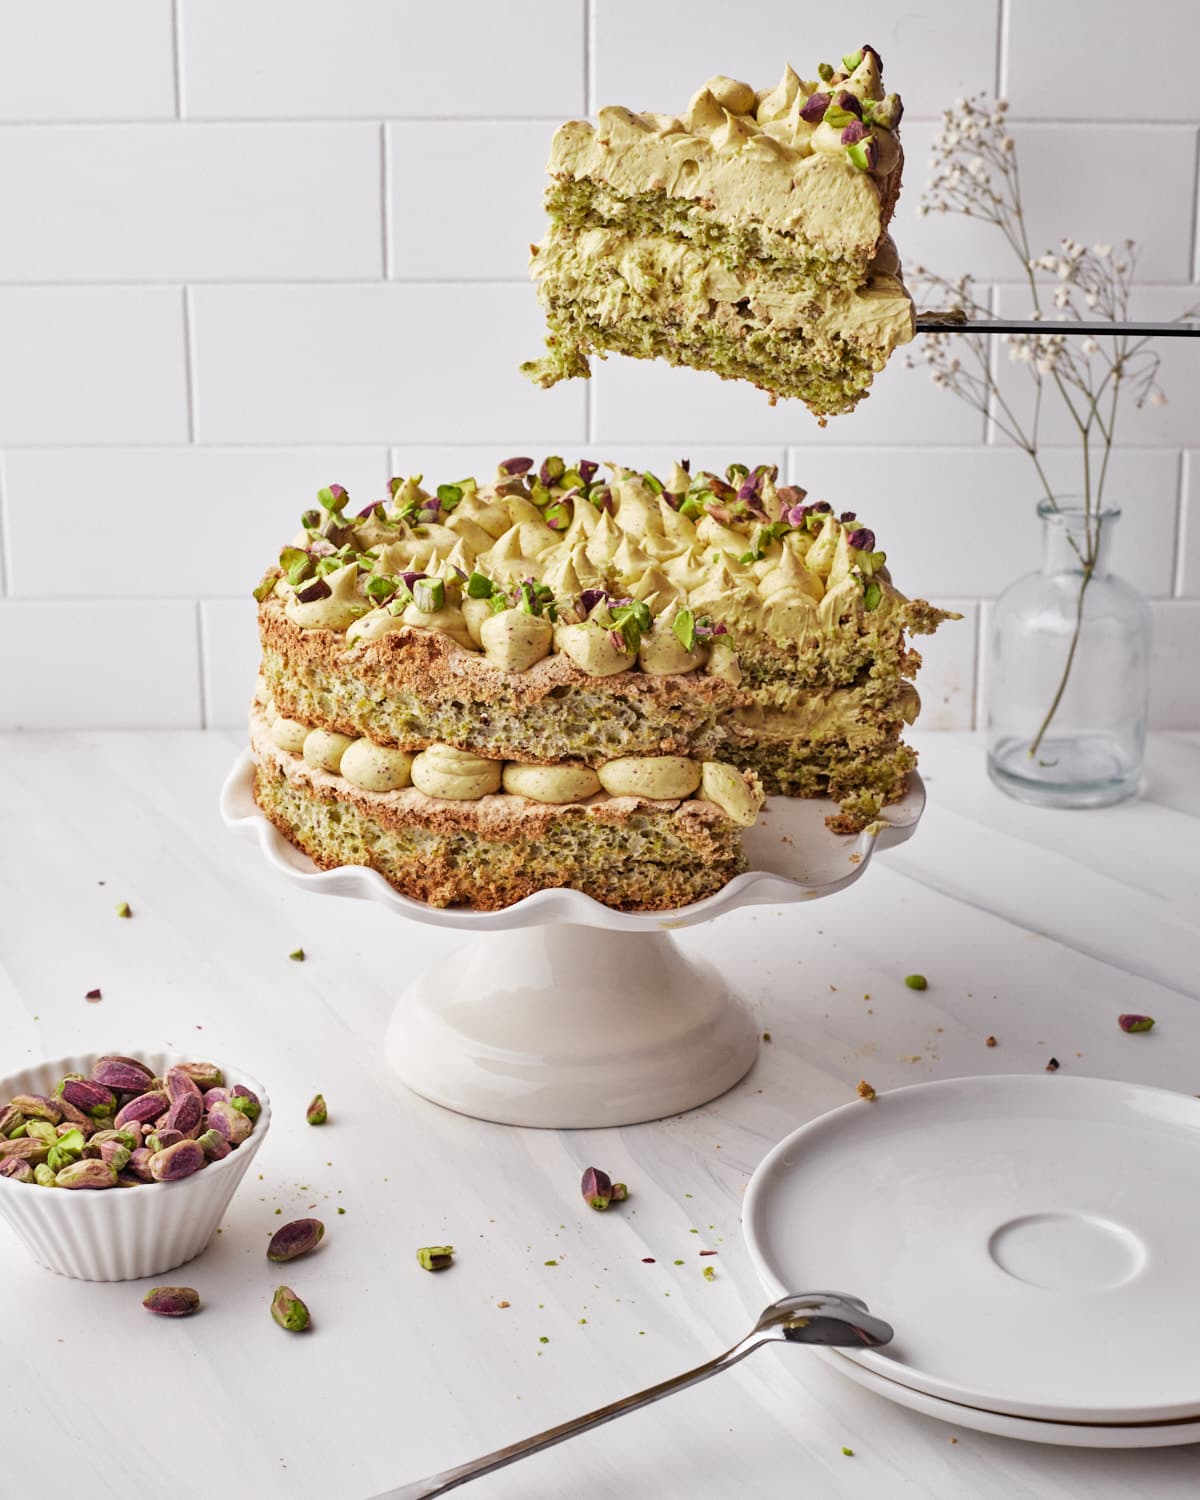 Slice of pistachio dacquoise being lifted out of the cake. 